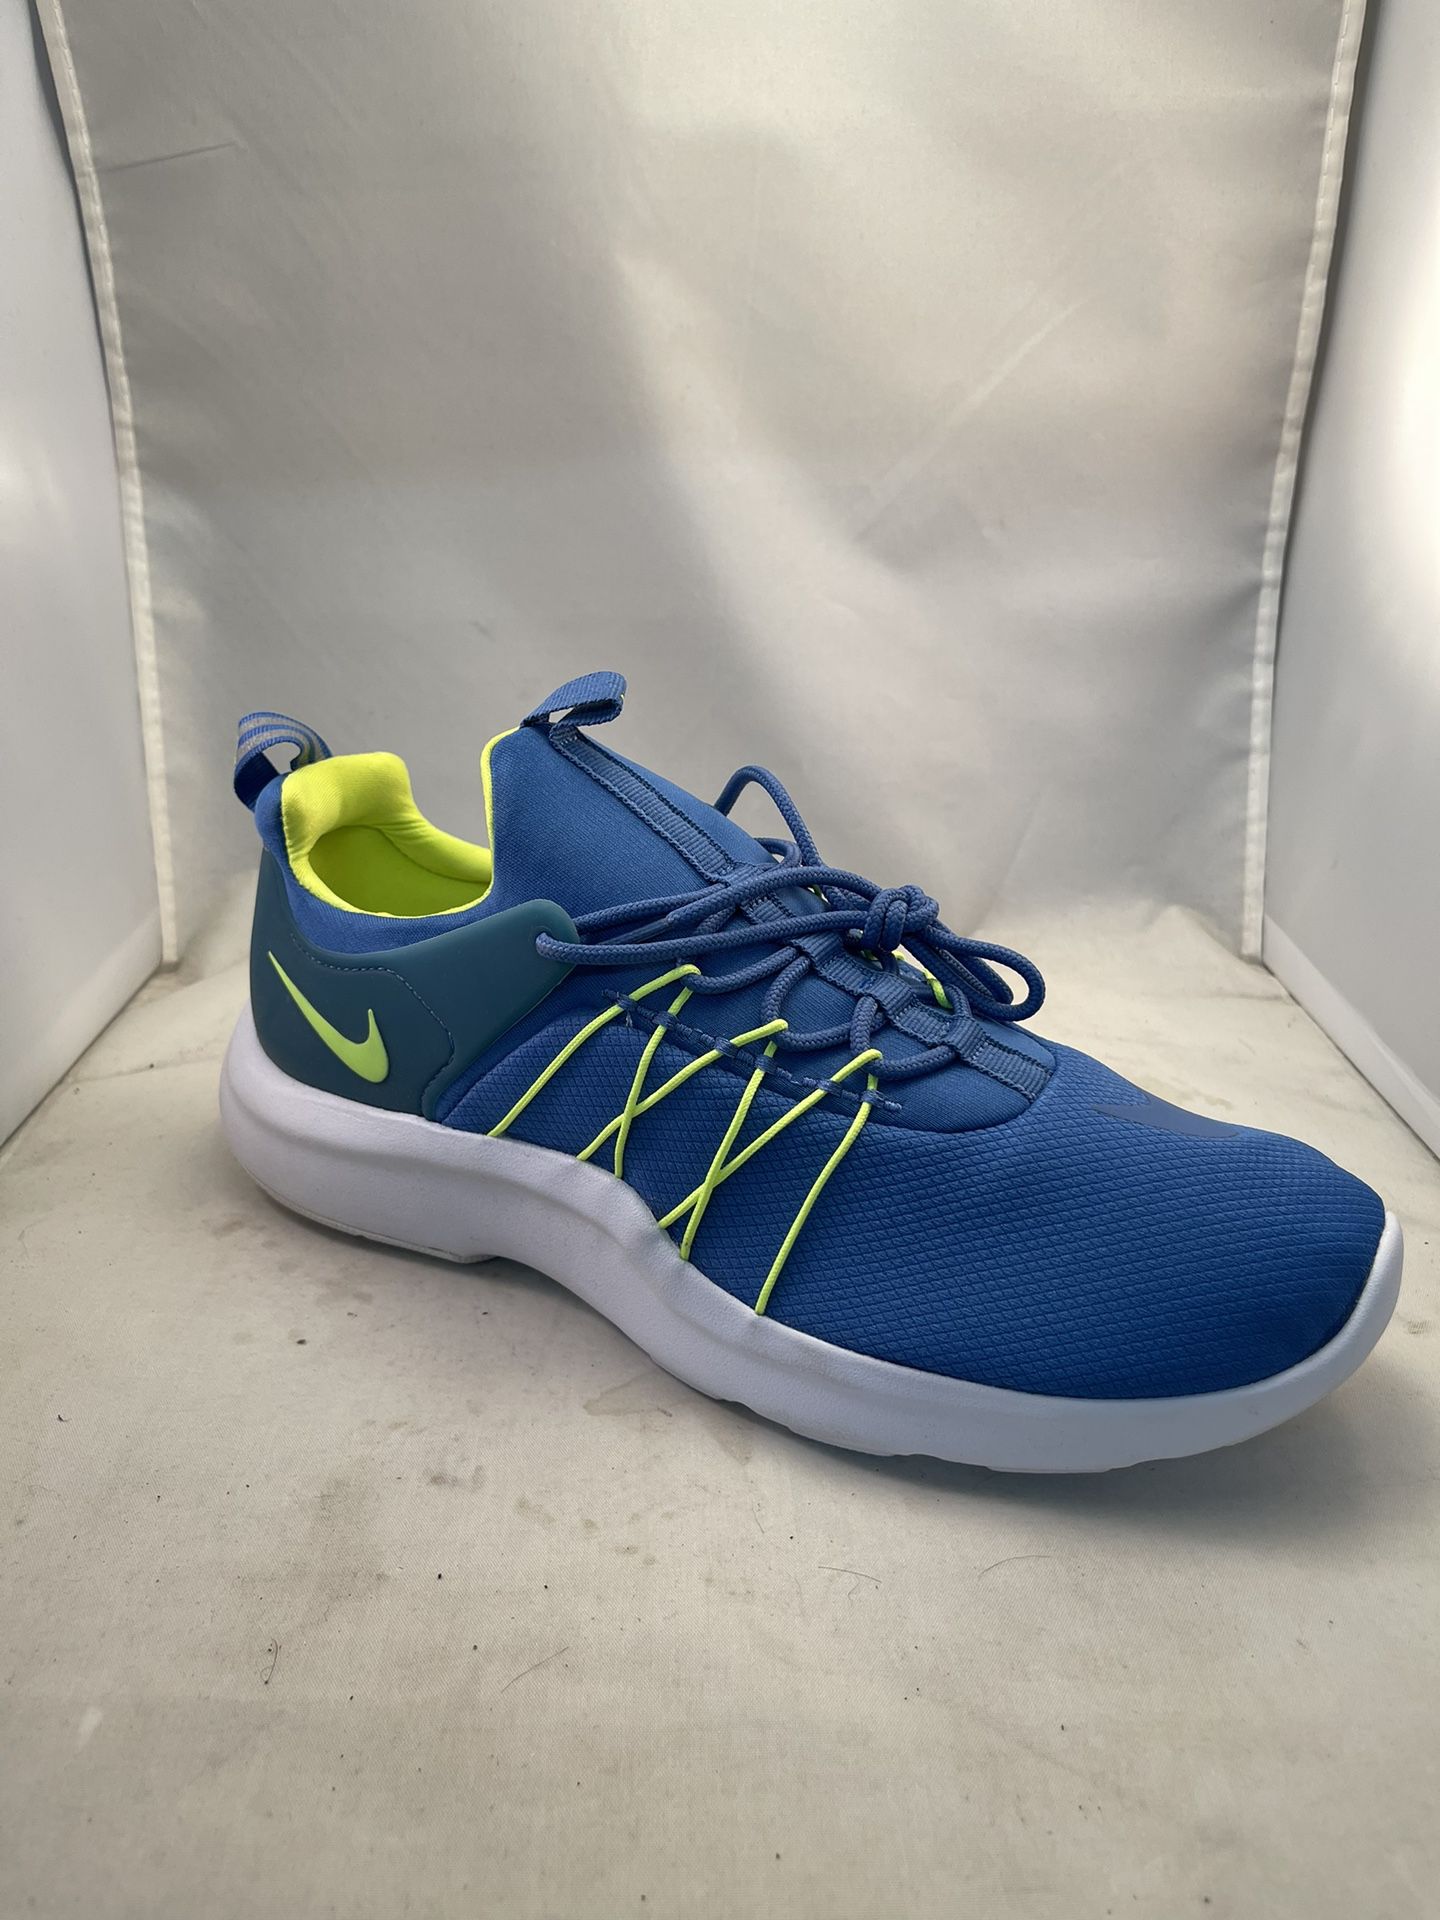 Nike Darwin Running Or Casual Shoes for Sale in Riverside County, CA -